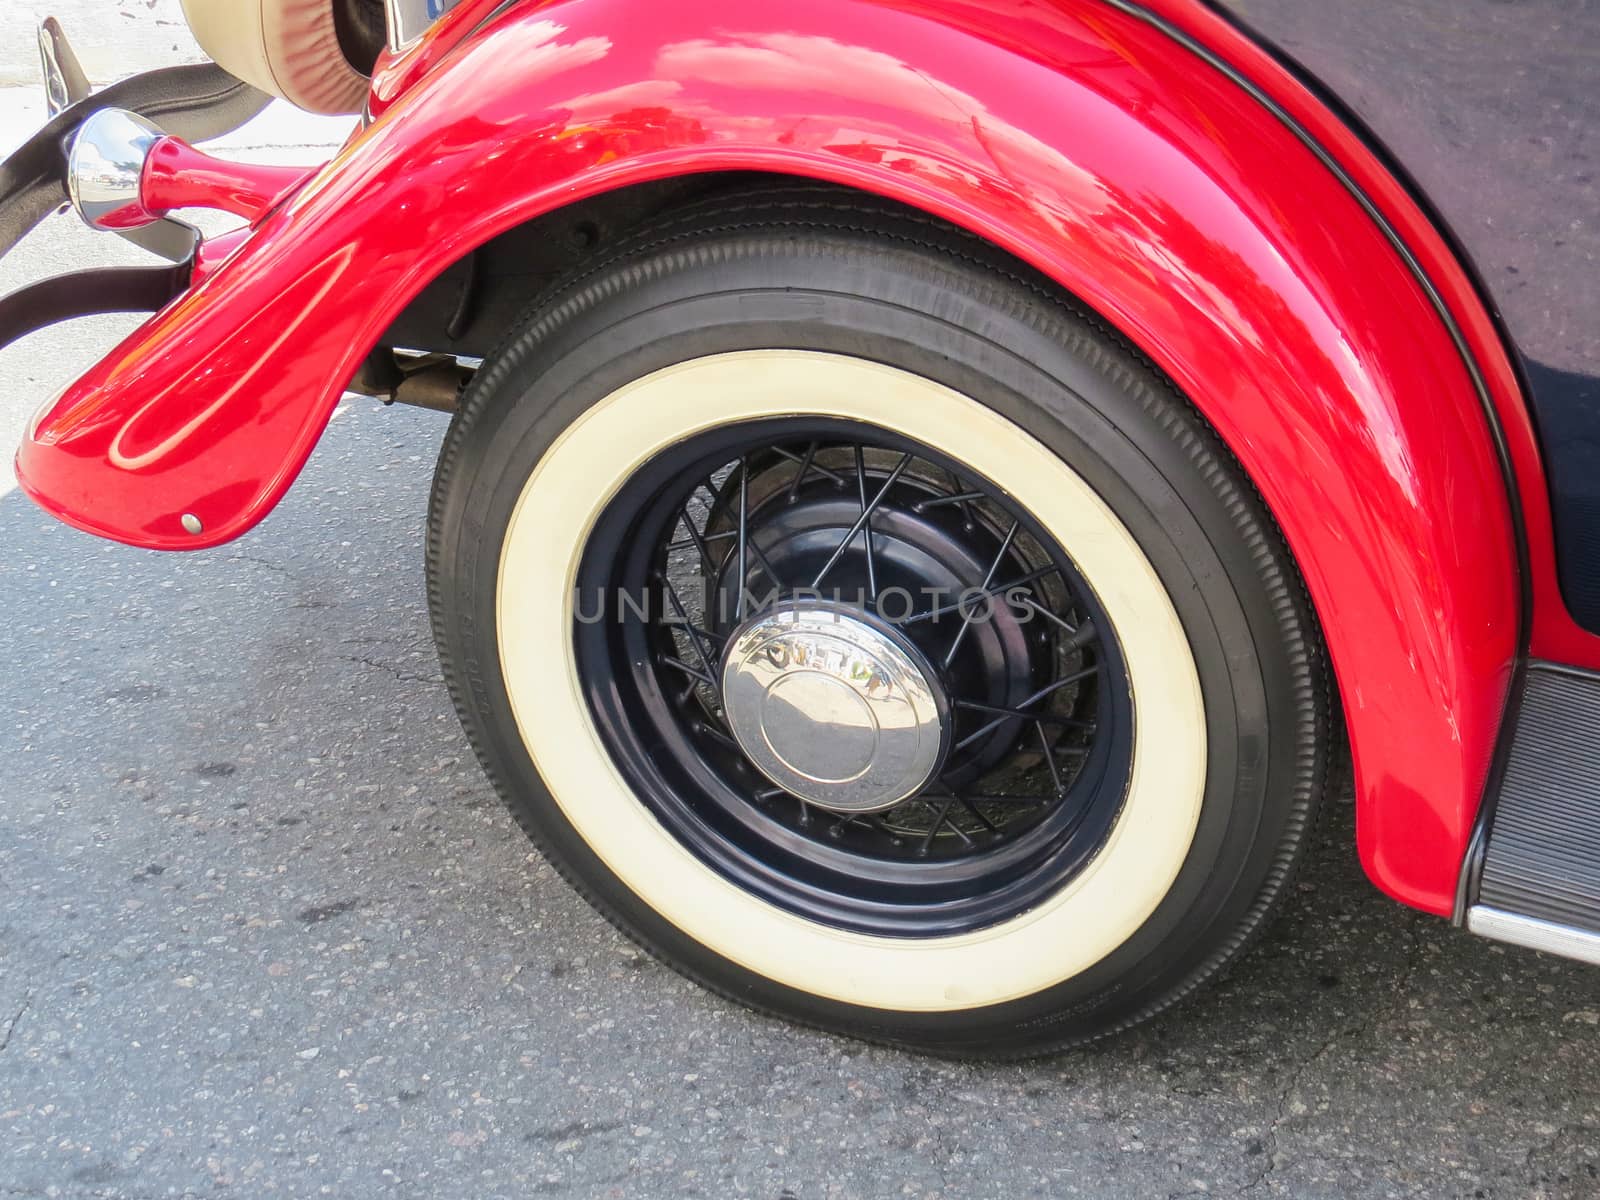 Detail of classic old car, wheel and red fender, with chrome shell.